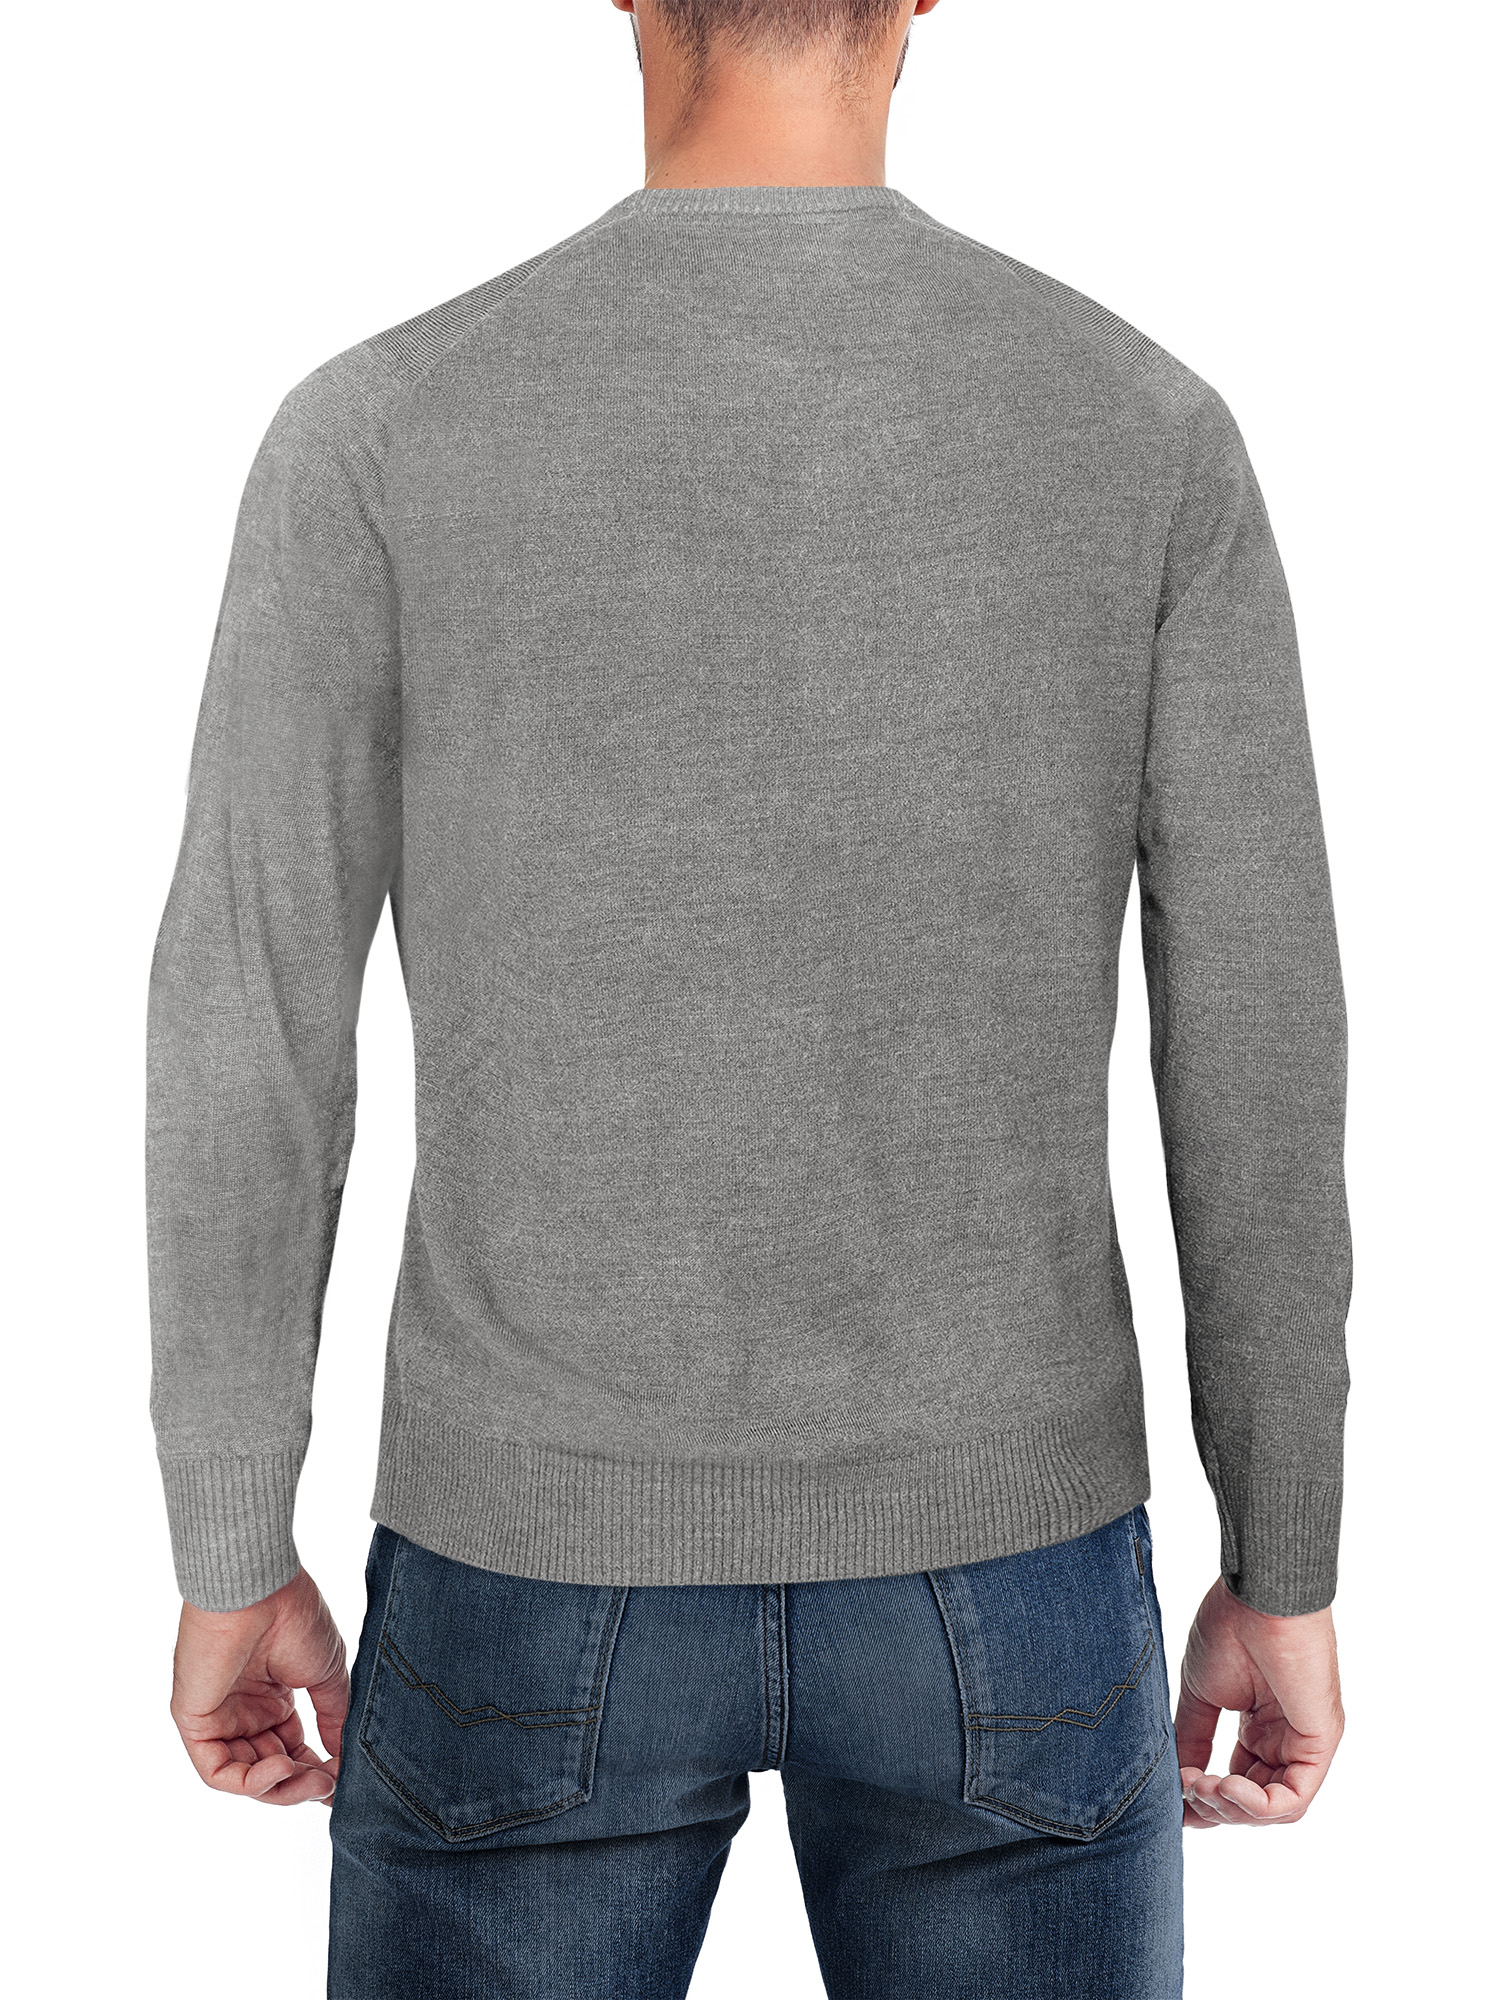 U.S. Polo Assn. Men's Jersey V-Neck Sweater - image 2 of 2